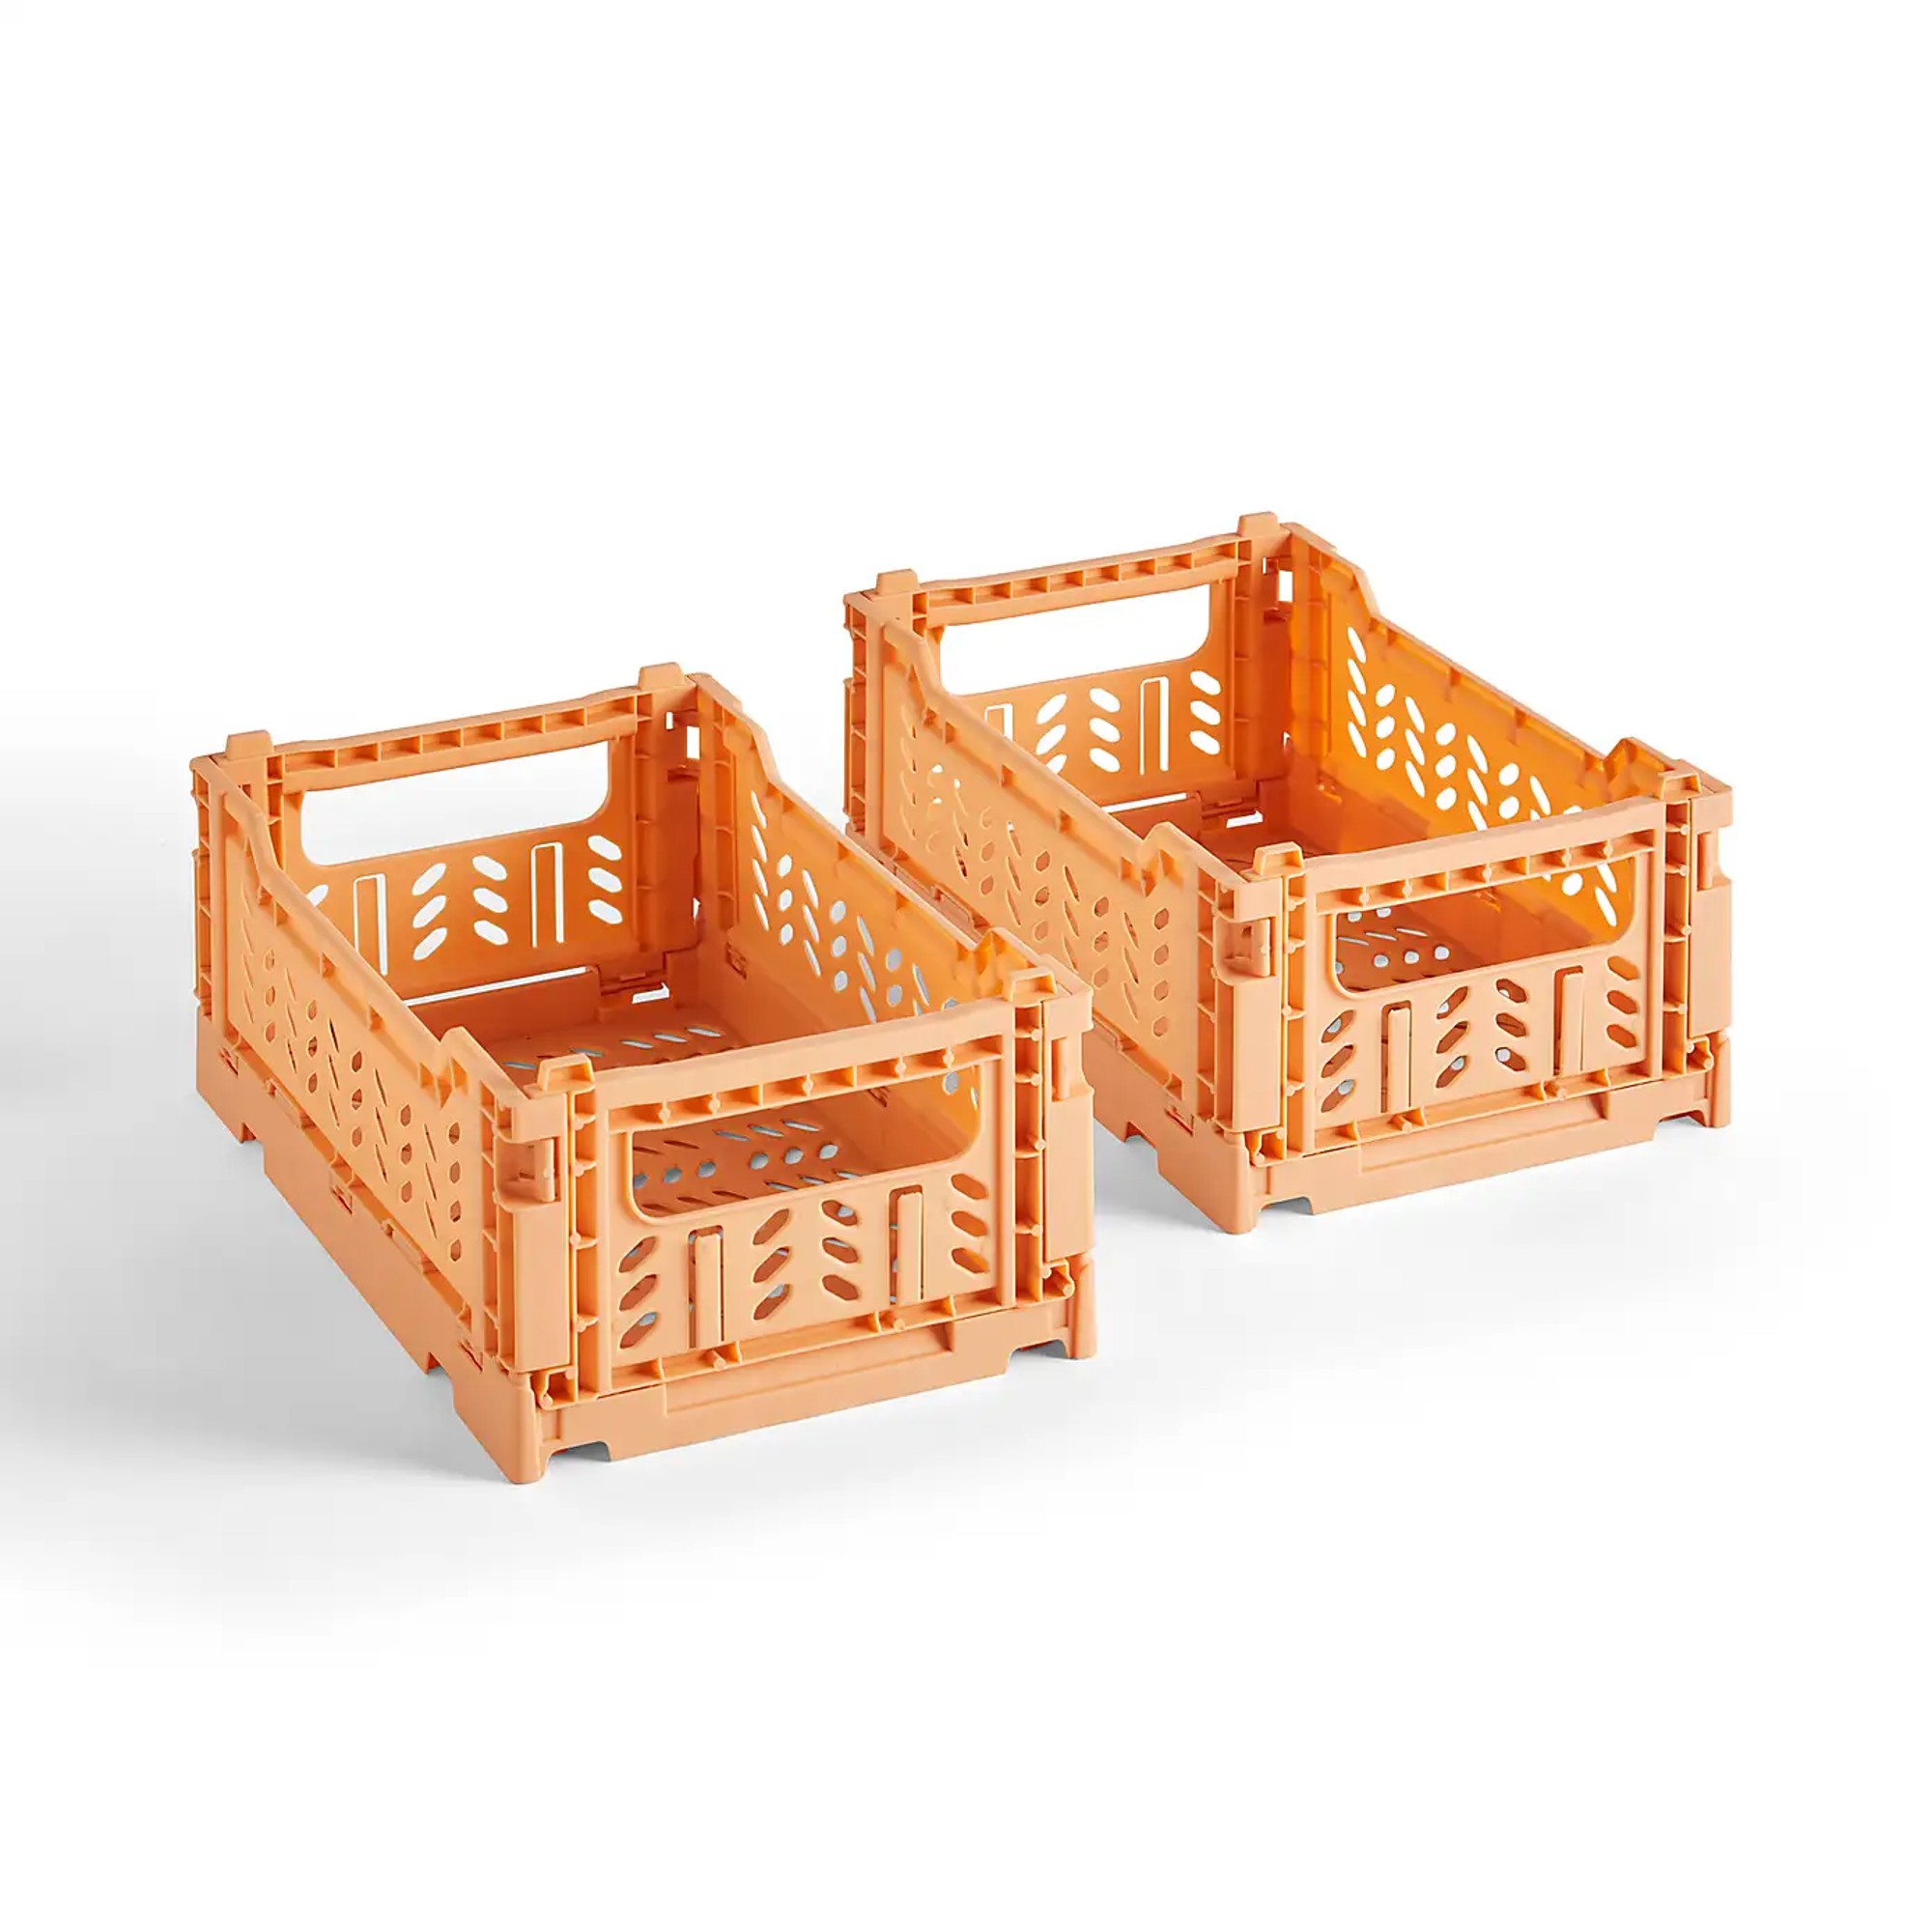 Dunelm Pack of 2 Foldable Crates